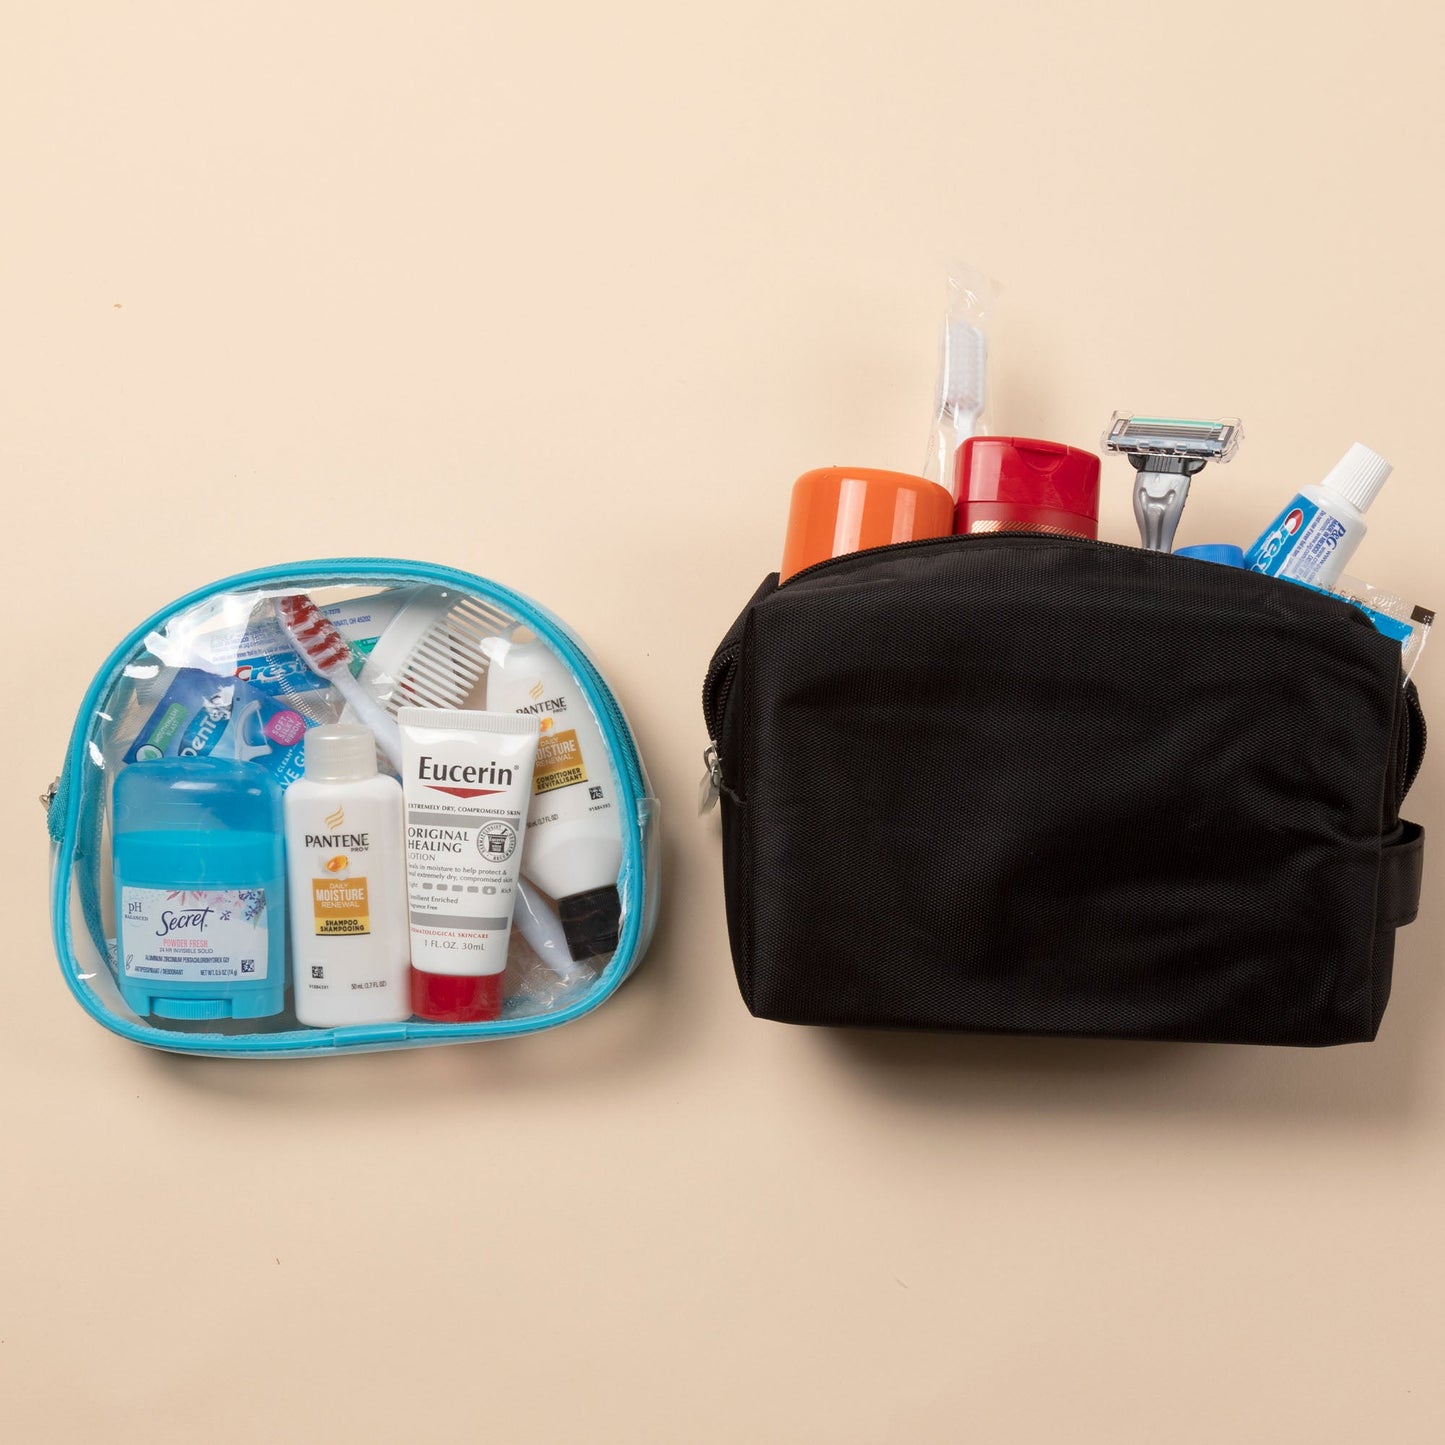 Help with Hygiene Kits For Men & Women in Need